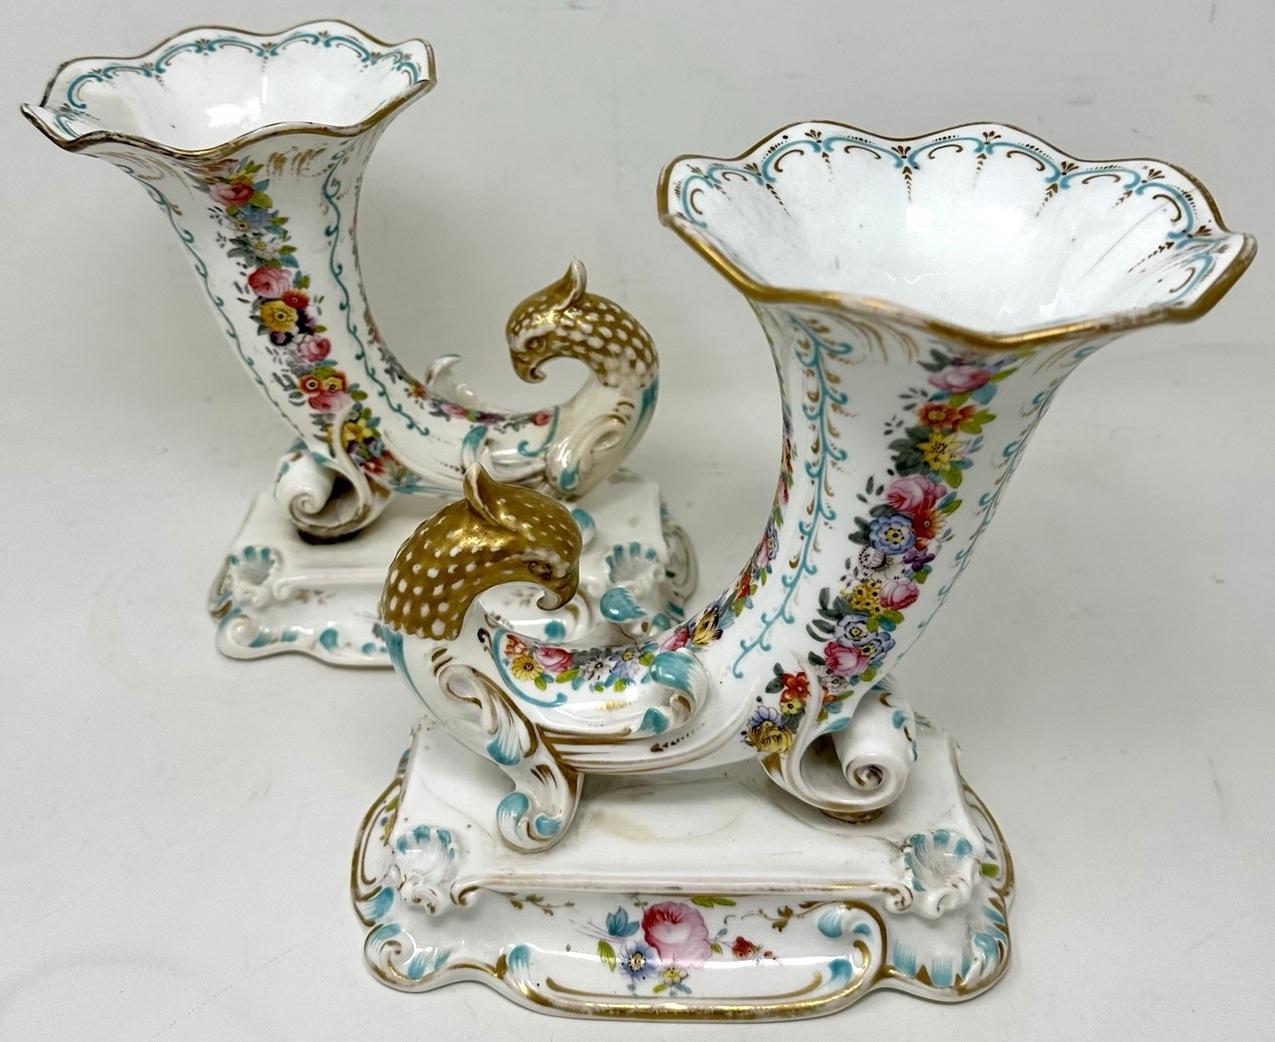 Stunning example of an English Hand Decorated Porcelain Flair Rim Vases of museum quality, unmarked but firmly attributed to Rockingham. Last half of the Nineteenth Century.  

Each delicate wavy rim horn of plenty superbly hand painted depicting